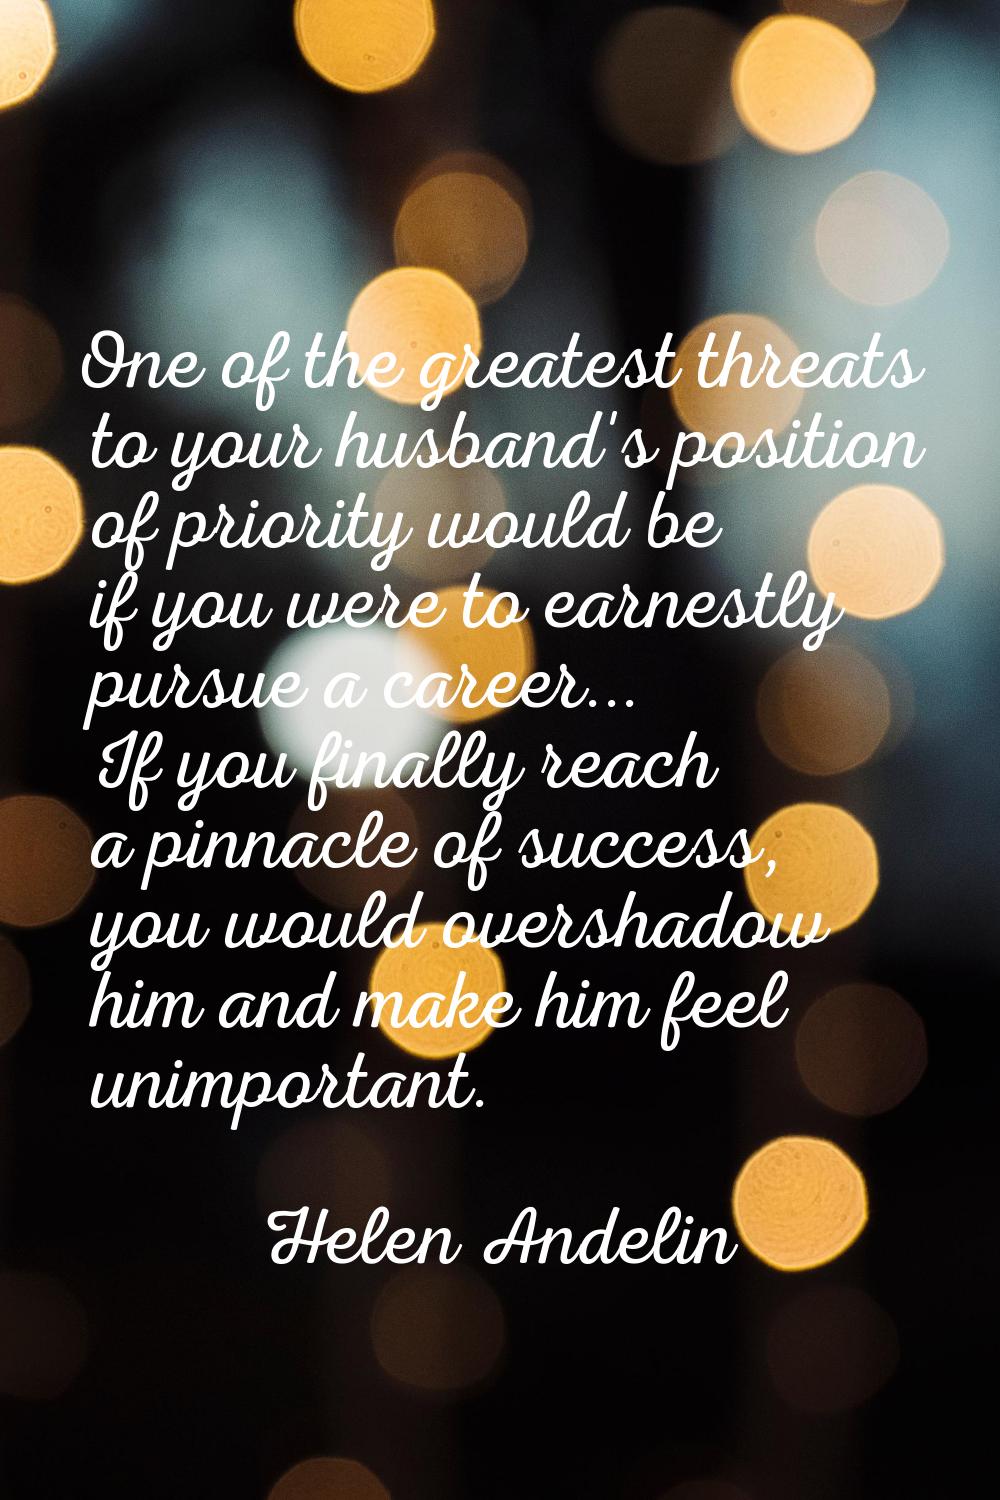 One of the greatest threats to your husband's position of priority would be if you were to earnestl